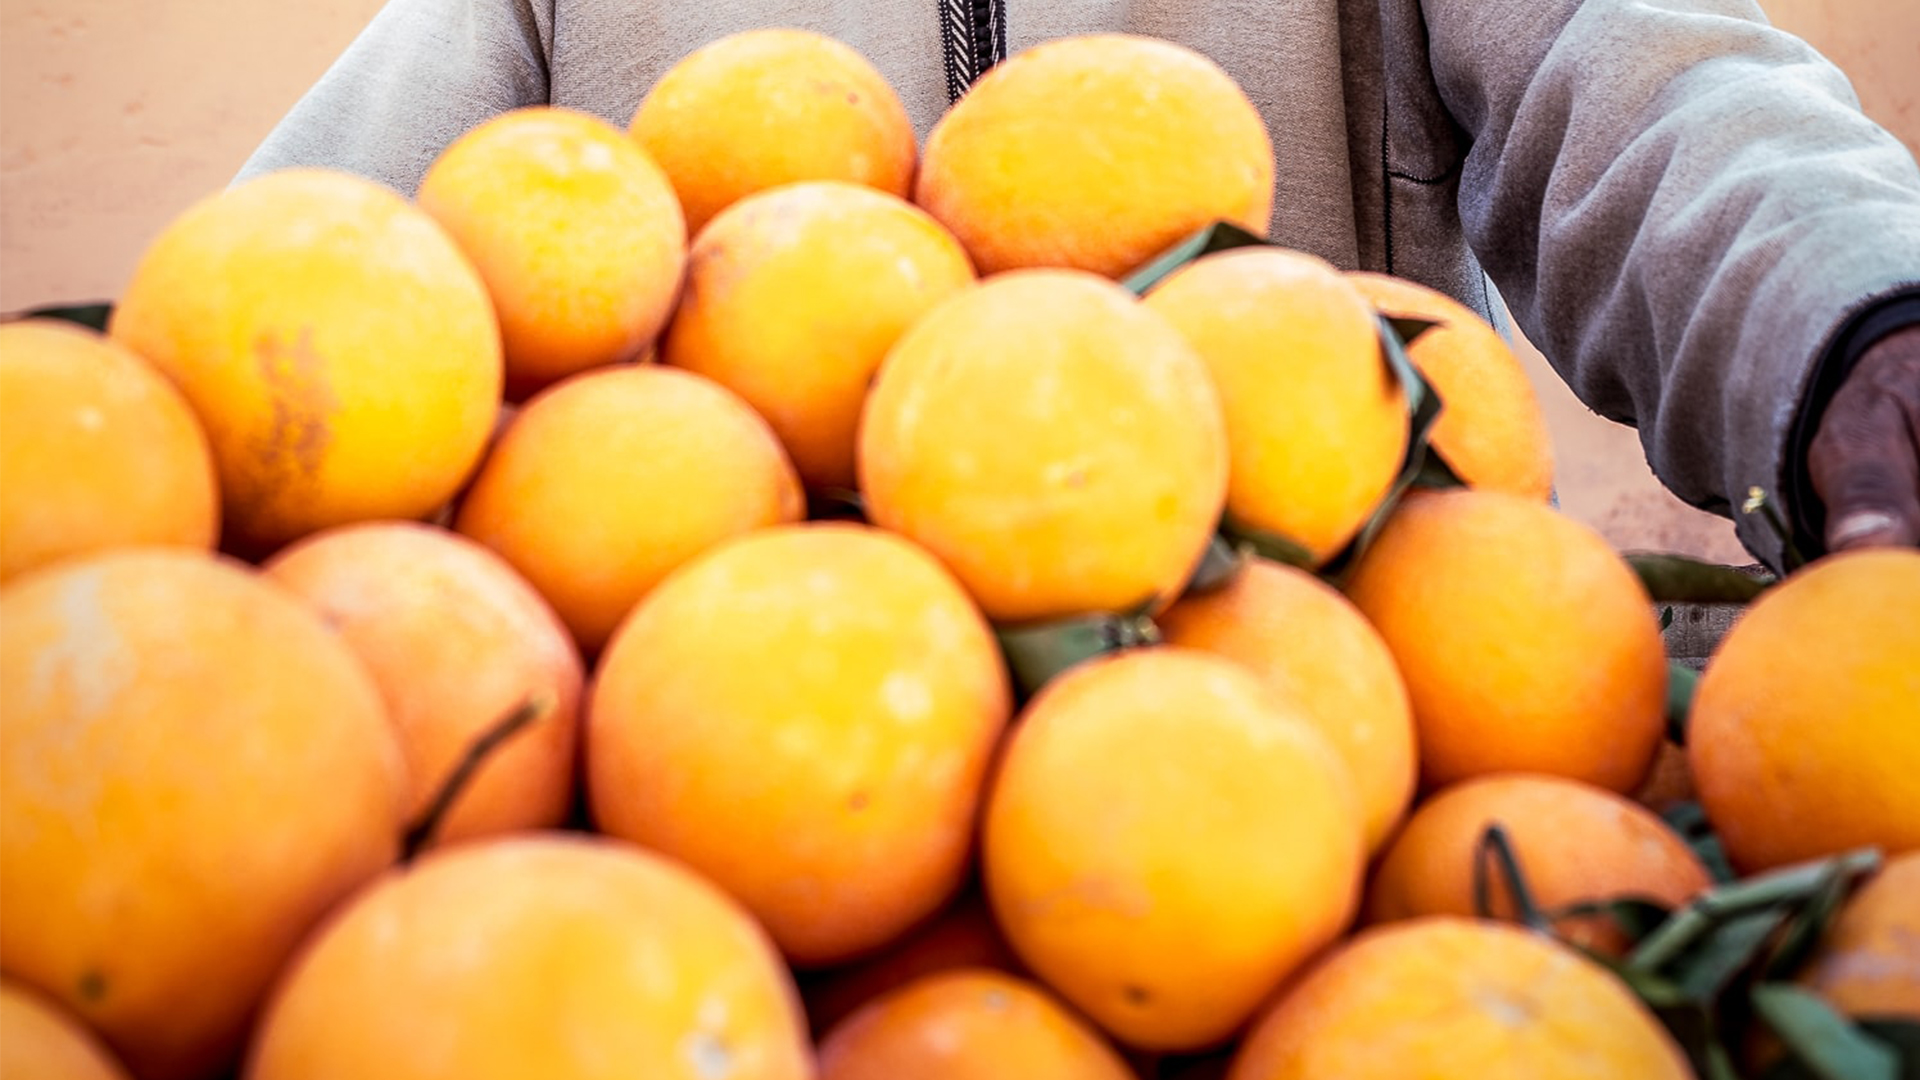 A farmer selling oranges at a food market in Marrakech